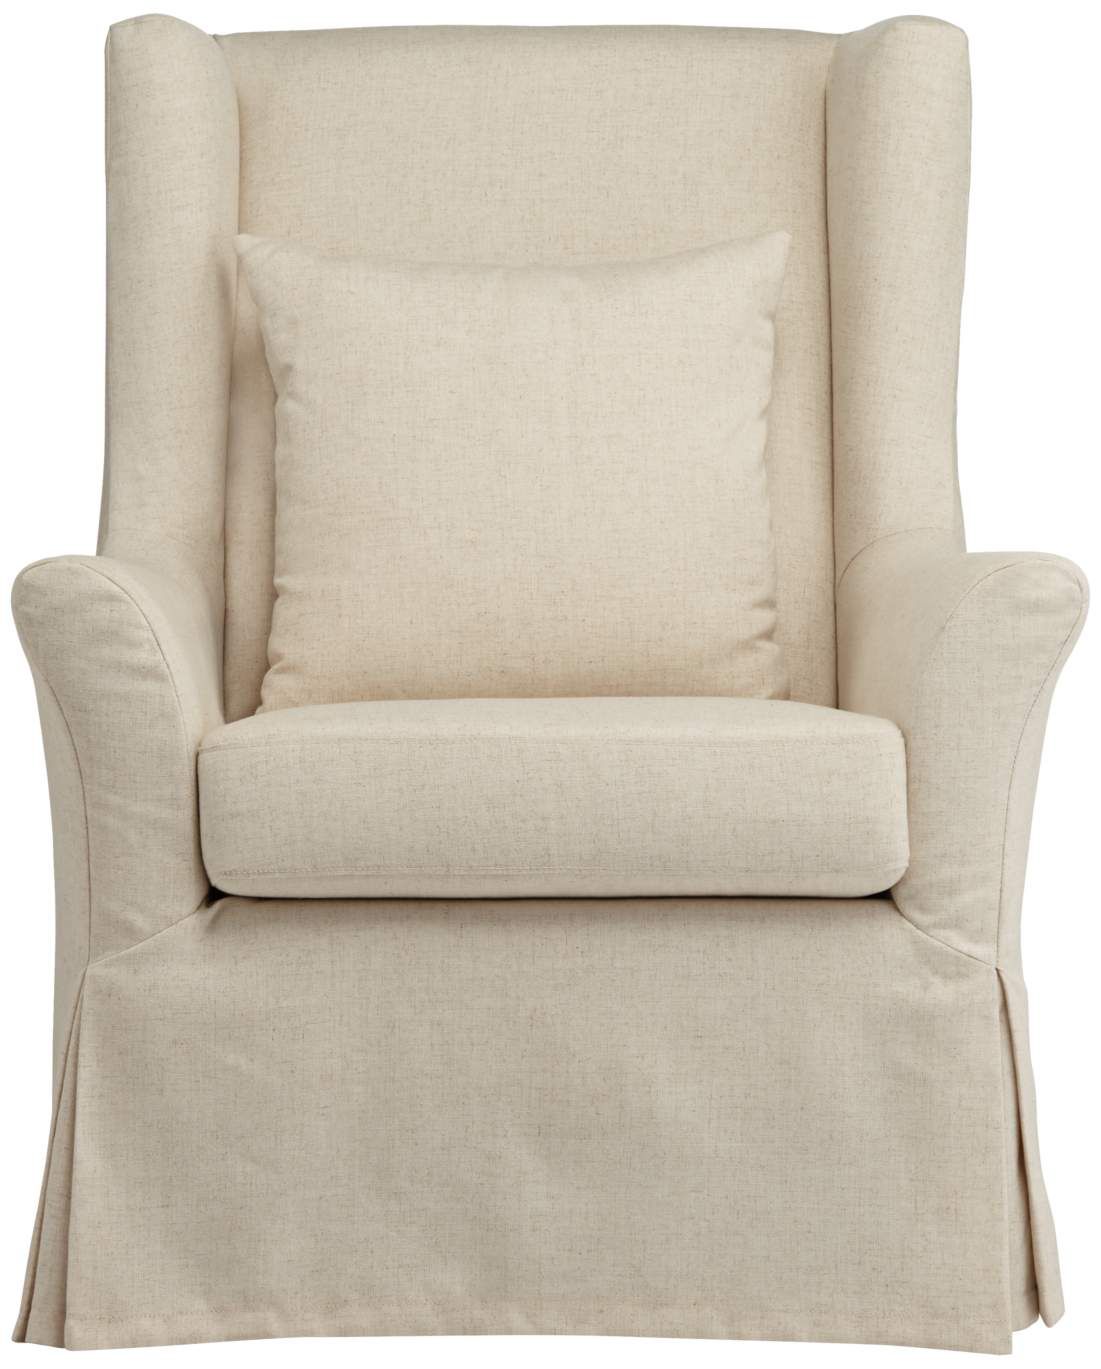 Pomona Oatmeal Fabric Slipcover Accent Chair | Lamps Plus